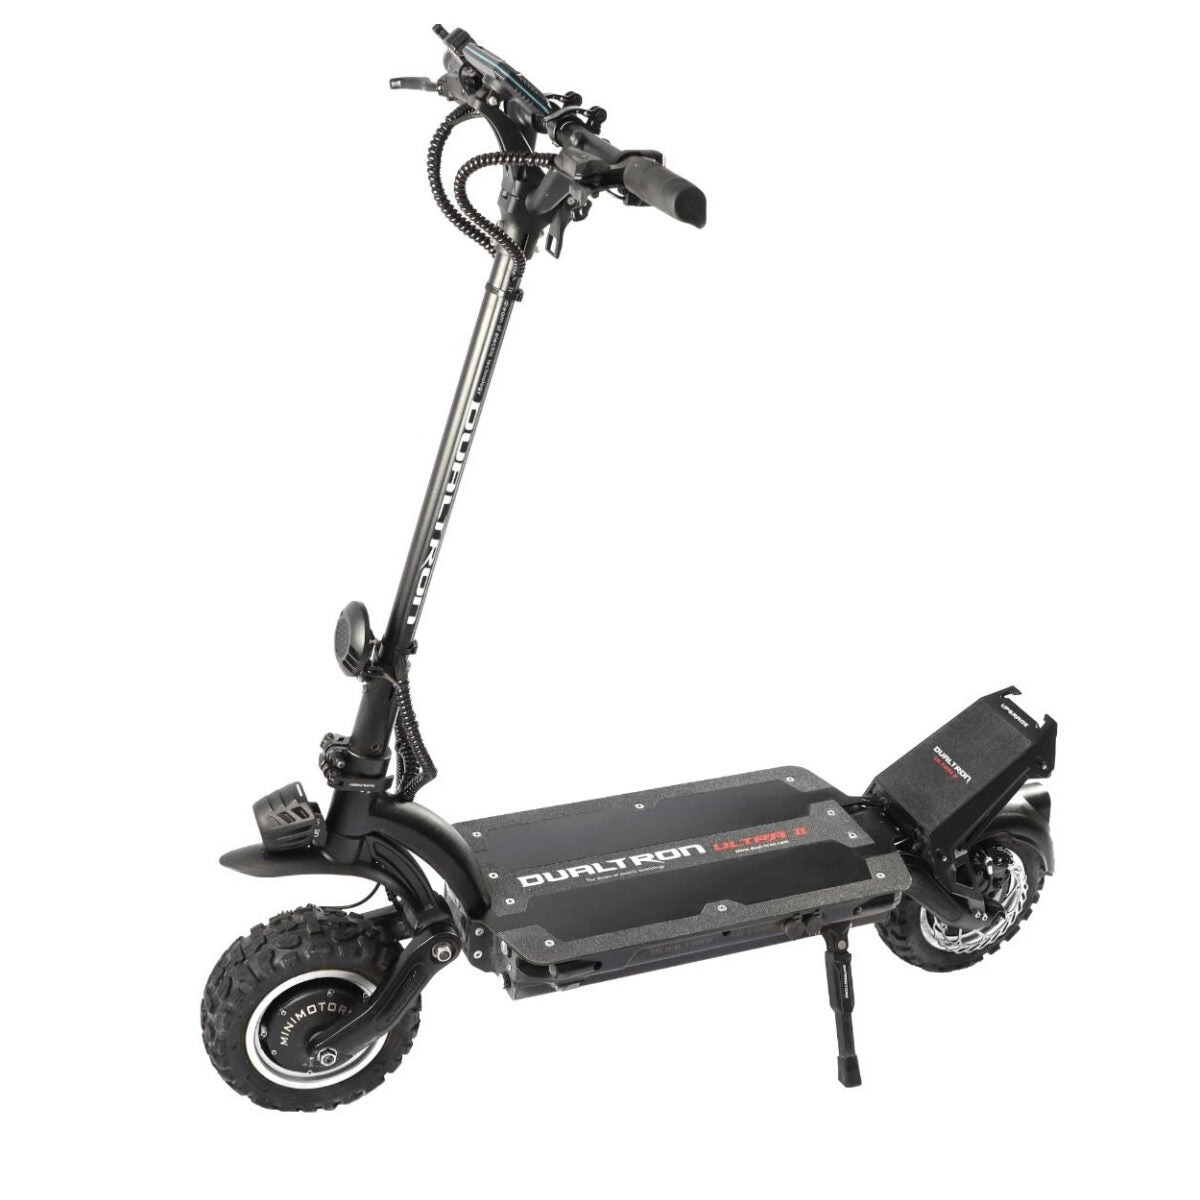 Dualtron Victor Electric Scooter - Minimotors USA